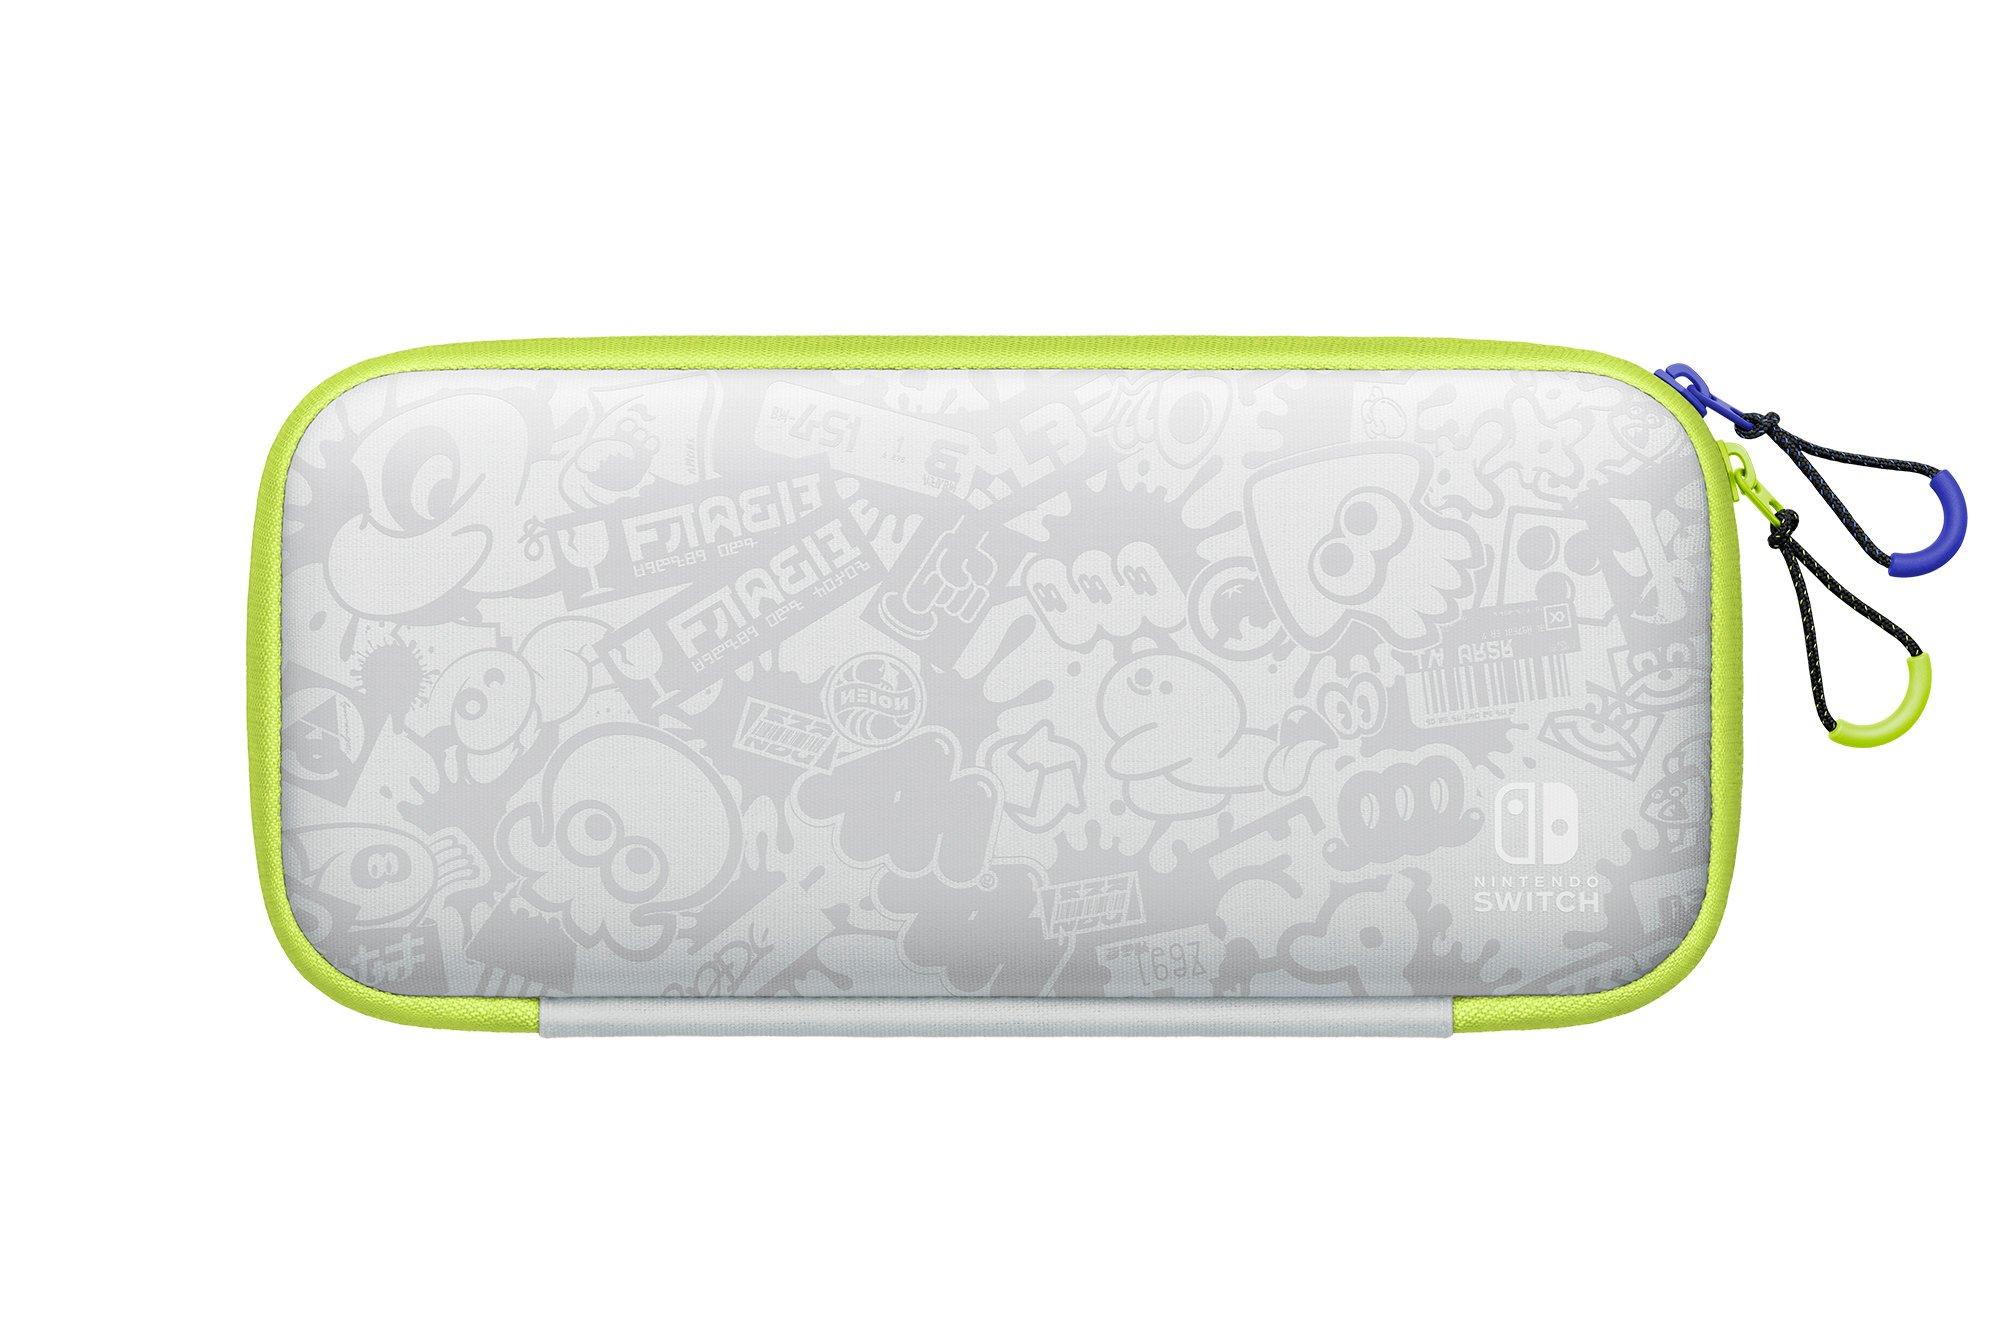 Nintendo Switch Carrying Case and Screen Protector Splatoon 3 Edition